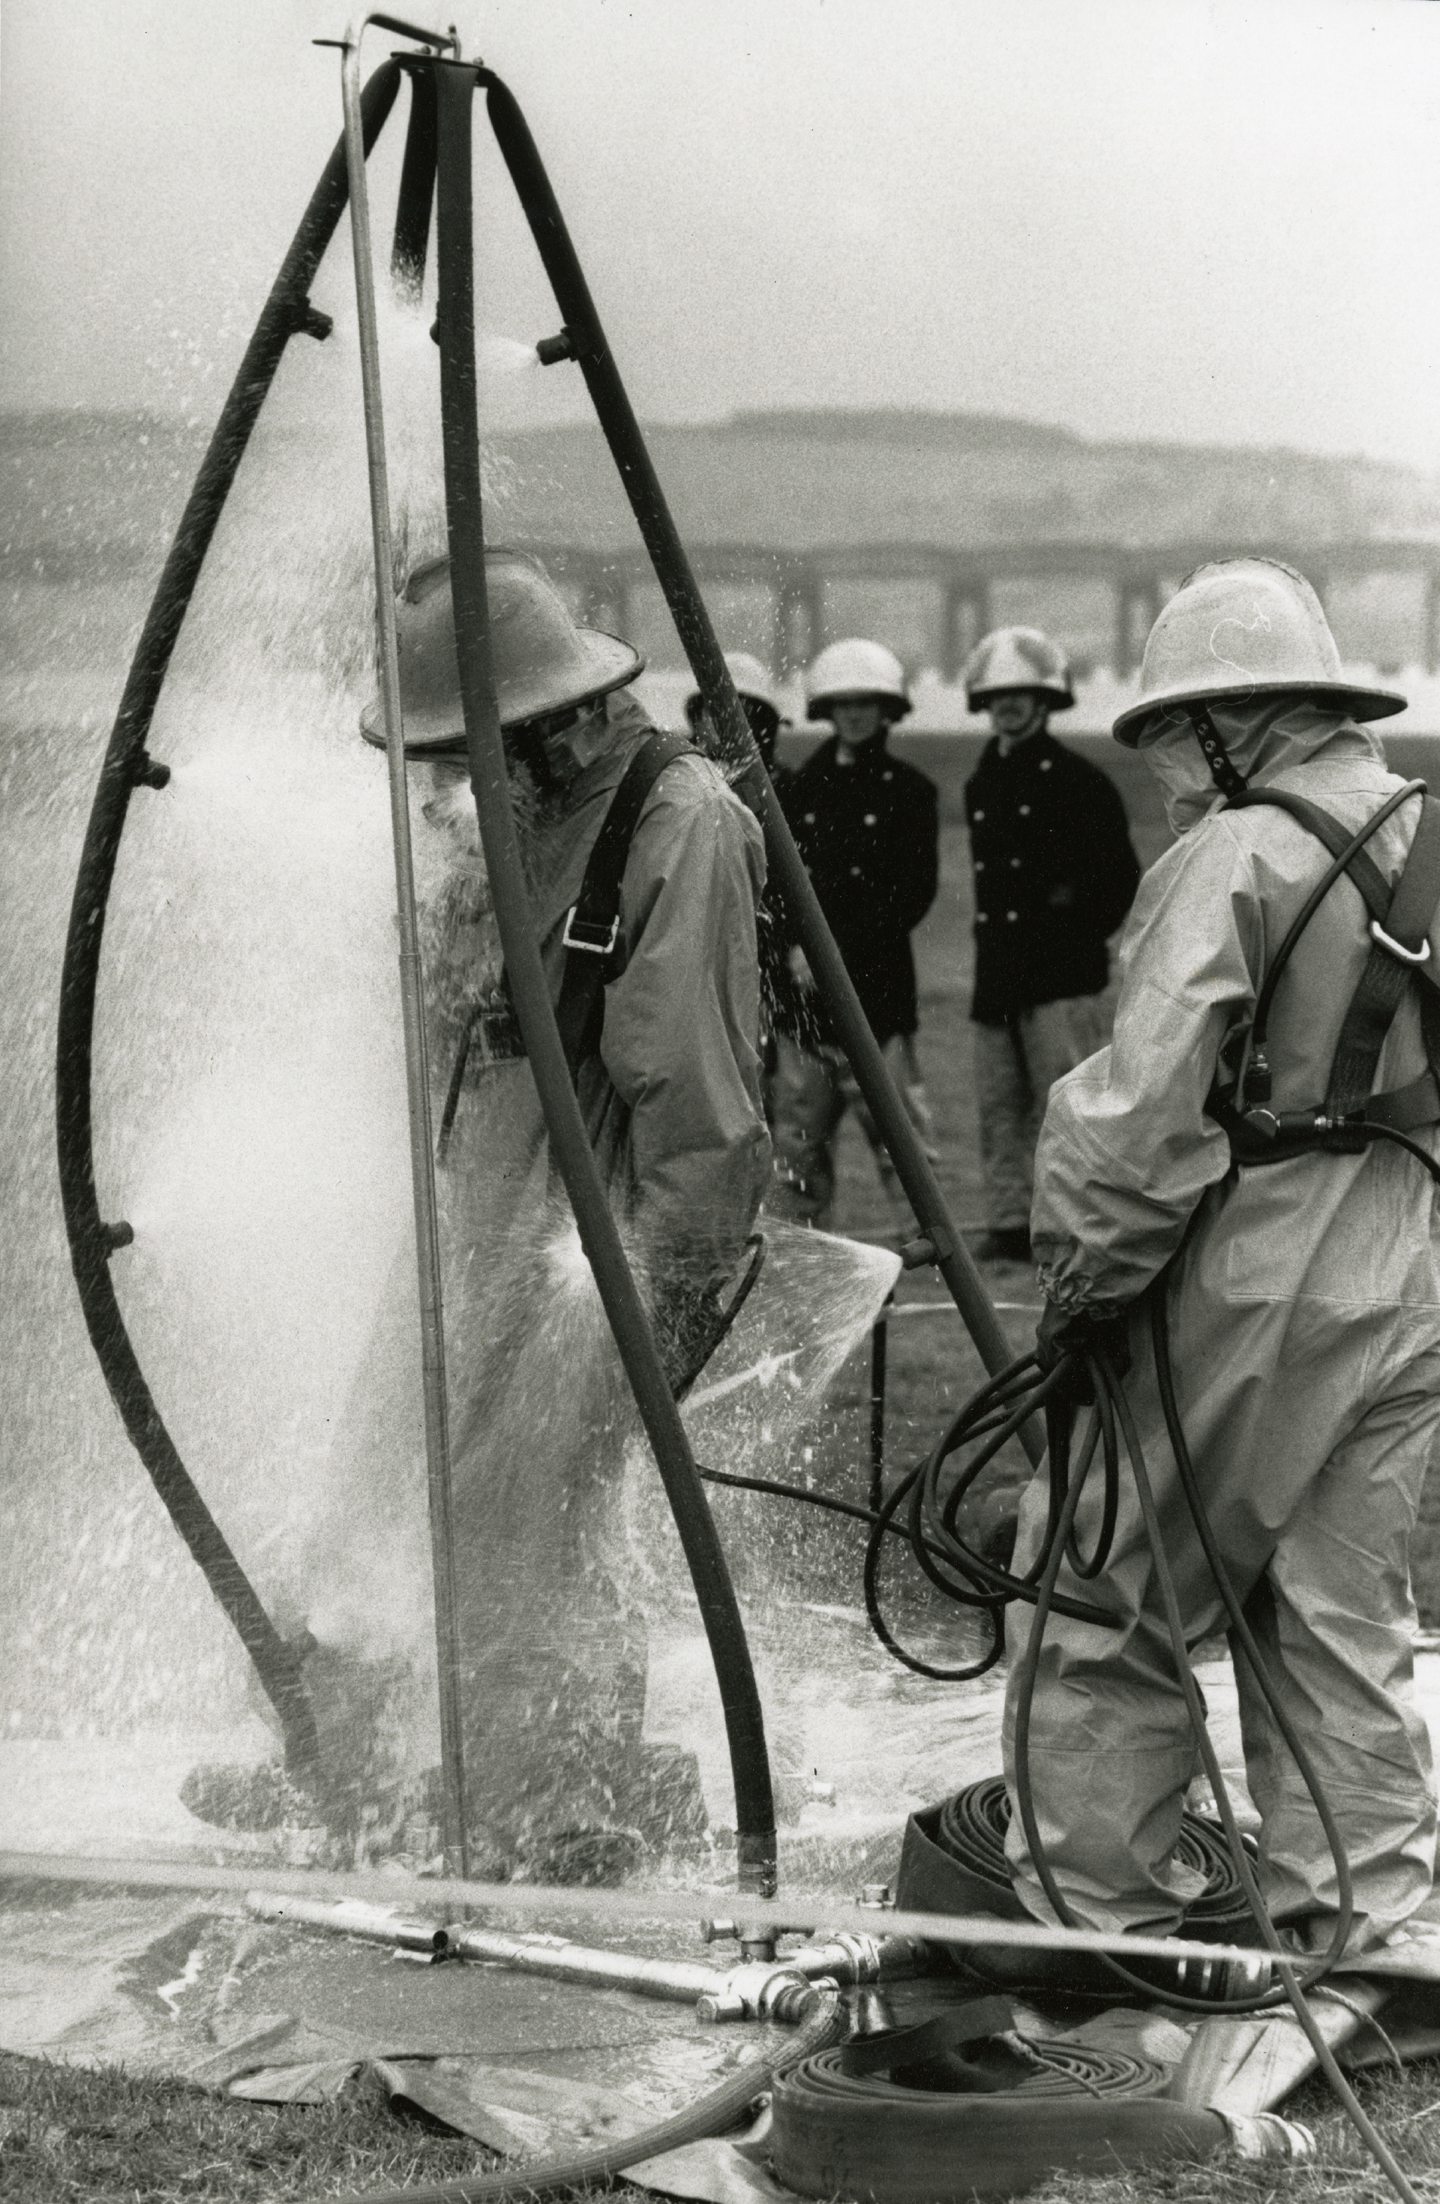 Firefighters rinse off after this exercise at Dundee Airport in 1989